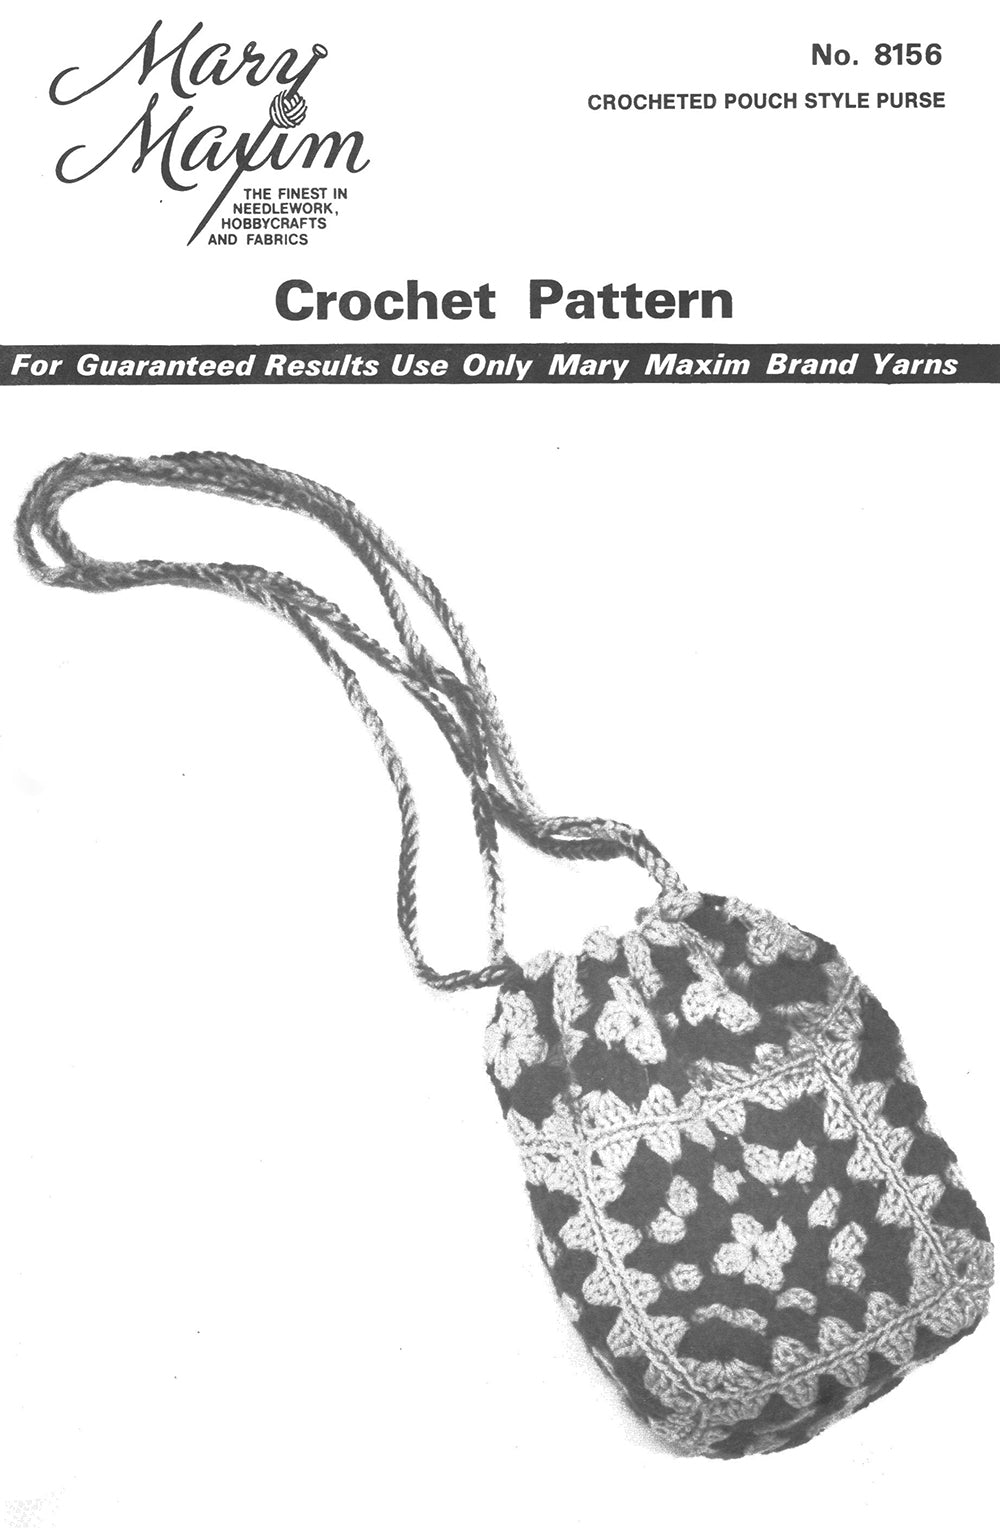 Crocheted Pouch Style Purse Pattern